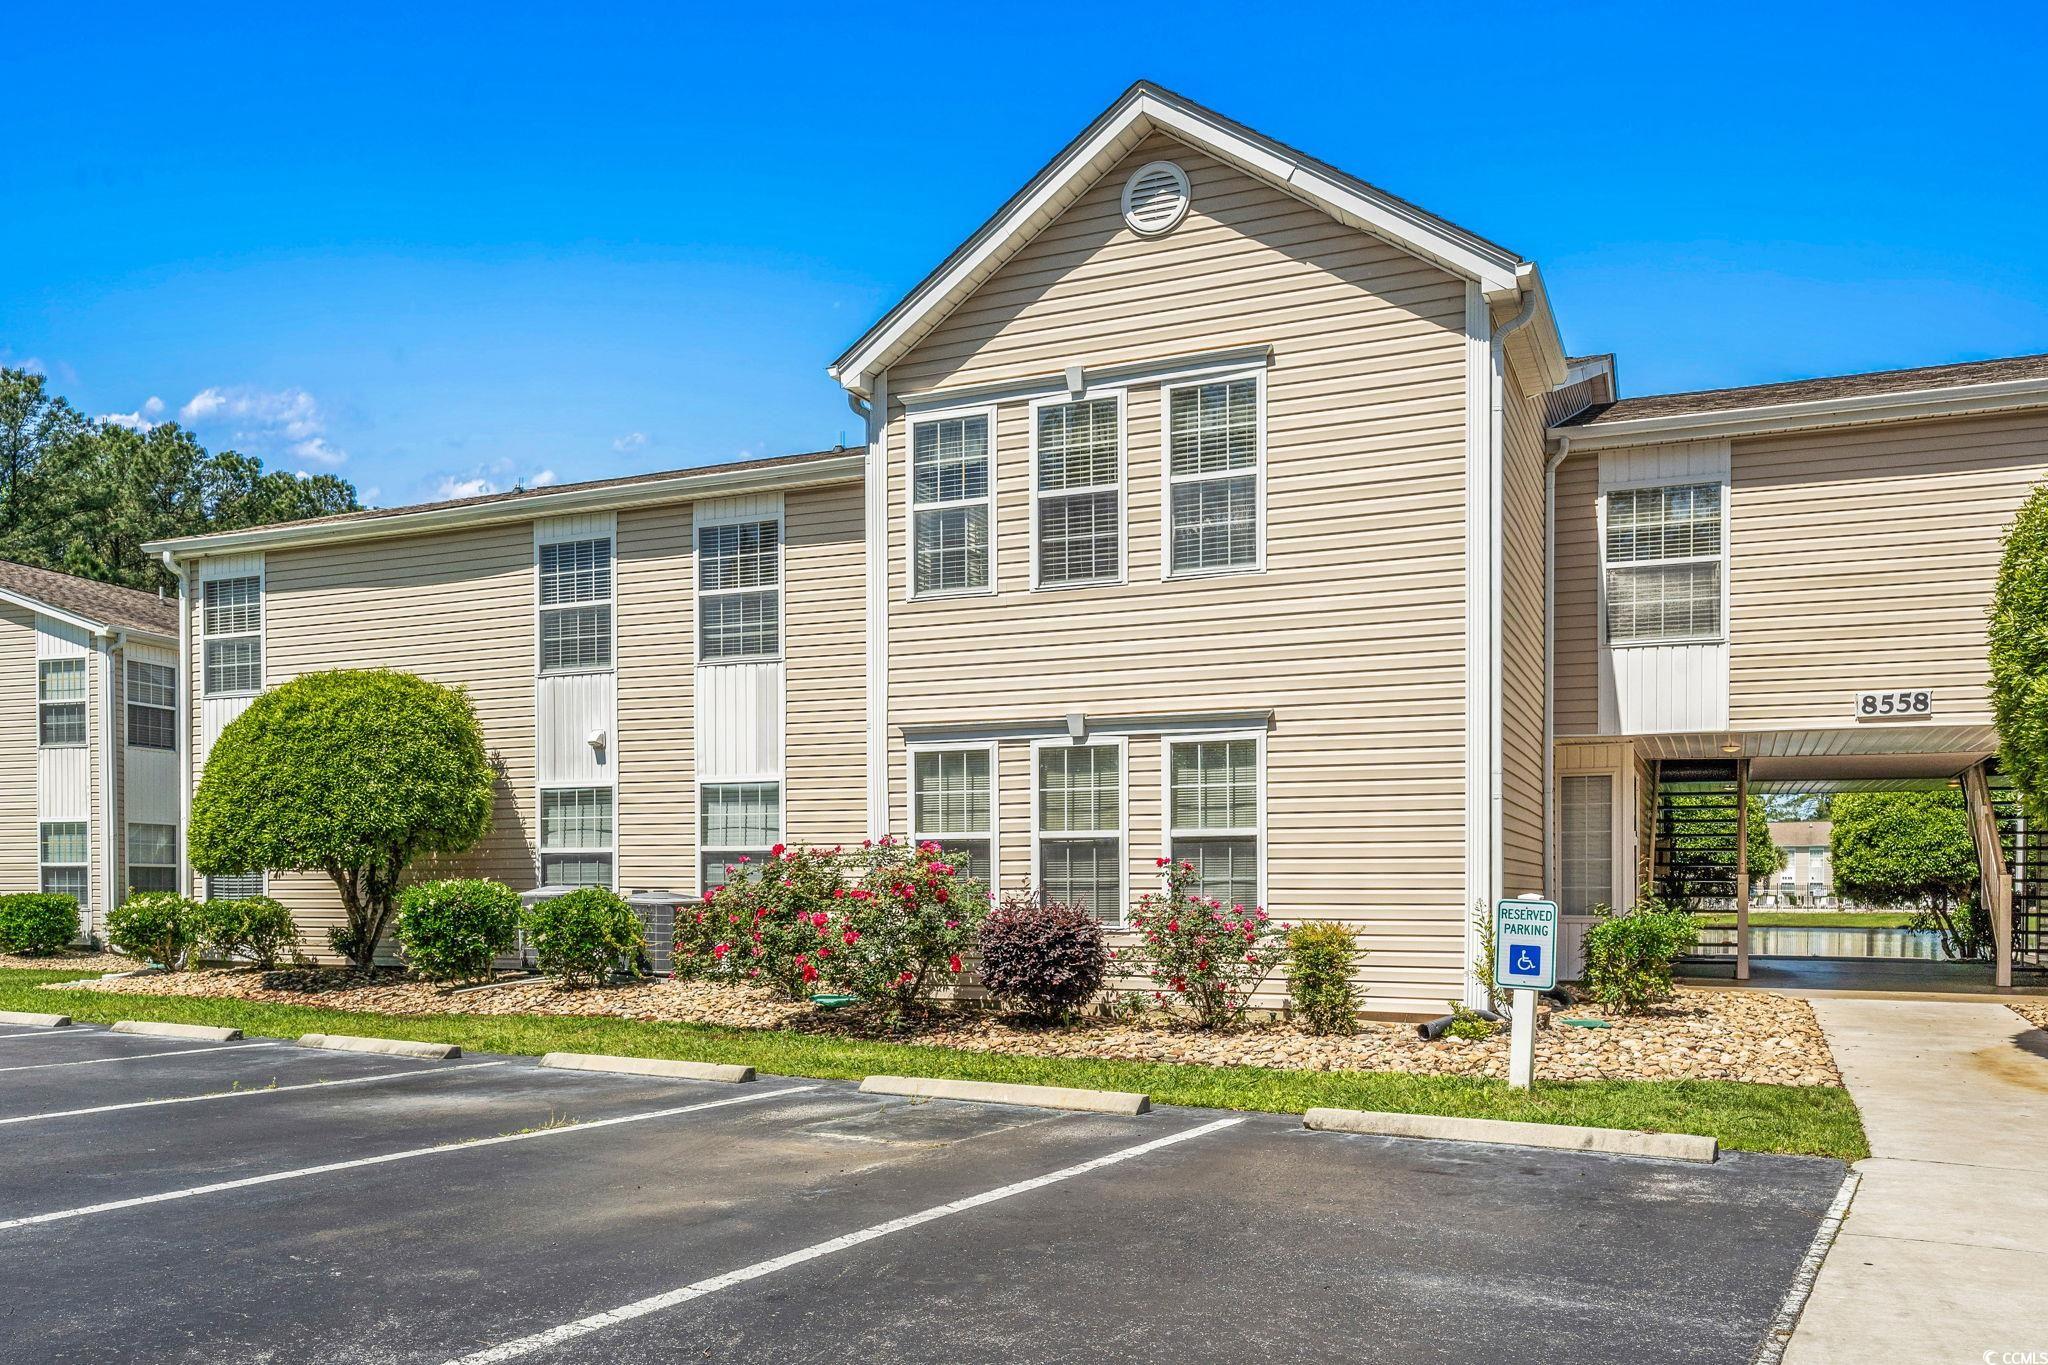 ***open house sun april 28th 12-2 pm*** welcome to your coastal oasis in the heart of surfside beach! this charming single-level condo boasts 3 bedrooms and 2 bathrooms across 1300 square feet of thoughtfully designed space.  as you step inside, you're greeted by an inviting atmosphere highlighted by a flood of natural light pouring in through numerous windows, especially in the sunroom, perfect for soaking up the warm sunshine and enjoying relaxing moments with a good book or a cup of coffee.  the heart of this home is its updated kitchen, featuring elegant granite countertops and soft-close cabinets, providing both style and functionality for your culinary adventures. the ceramic tile flooring adds a touch of coastal elegance, while plush new carpeting in two bedrooms ensures comfort underfoot.  the primary bathroom offers a touch of luxury with a large vanity boasting a double sink, providing ample space for your morning routines. step into the ceramic tile shower and unwind after a day of fun in the sun.  this condo also offers access to a community pool, ideal for cooling off on those hot summer days or simply lounging poolside with friends and family.  with its prime location in surfside beach and a host of desirable features, this condo presents an incredible opportunity for coastal living at its finest. don't miss out on making this your new home sweet home!